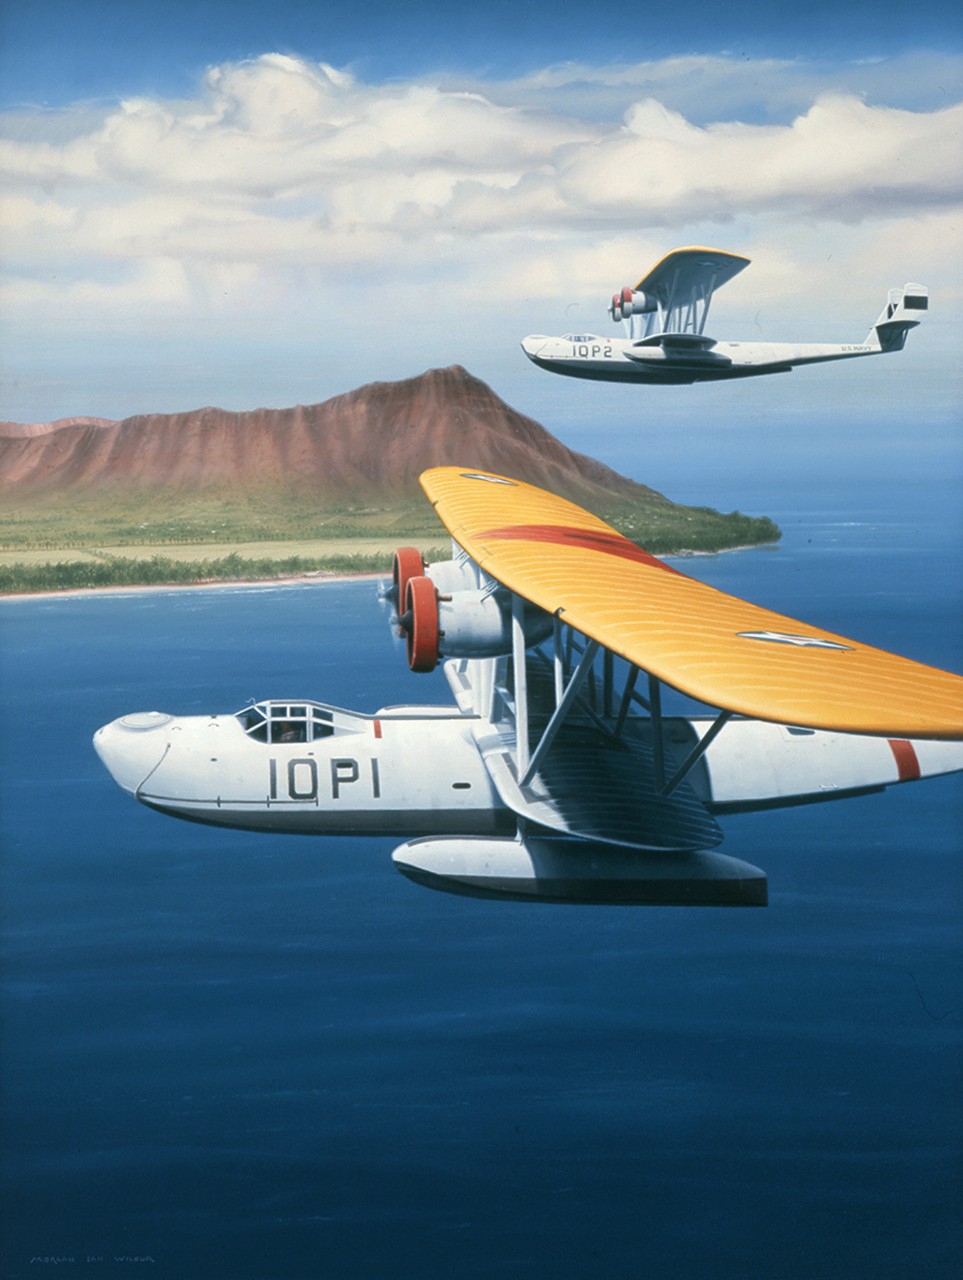 Two planes flying in front of Diamond Head, Hawaii